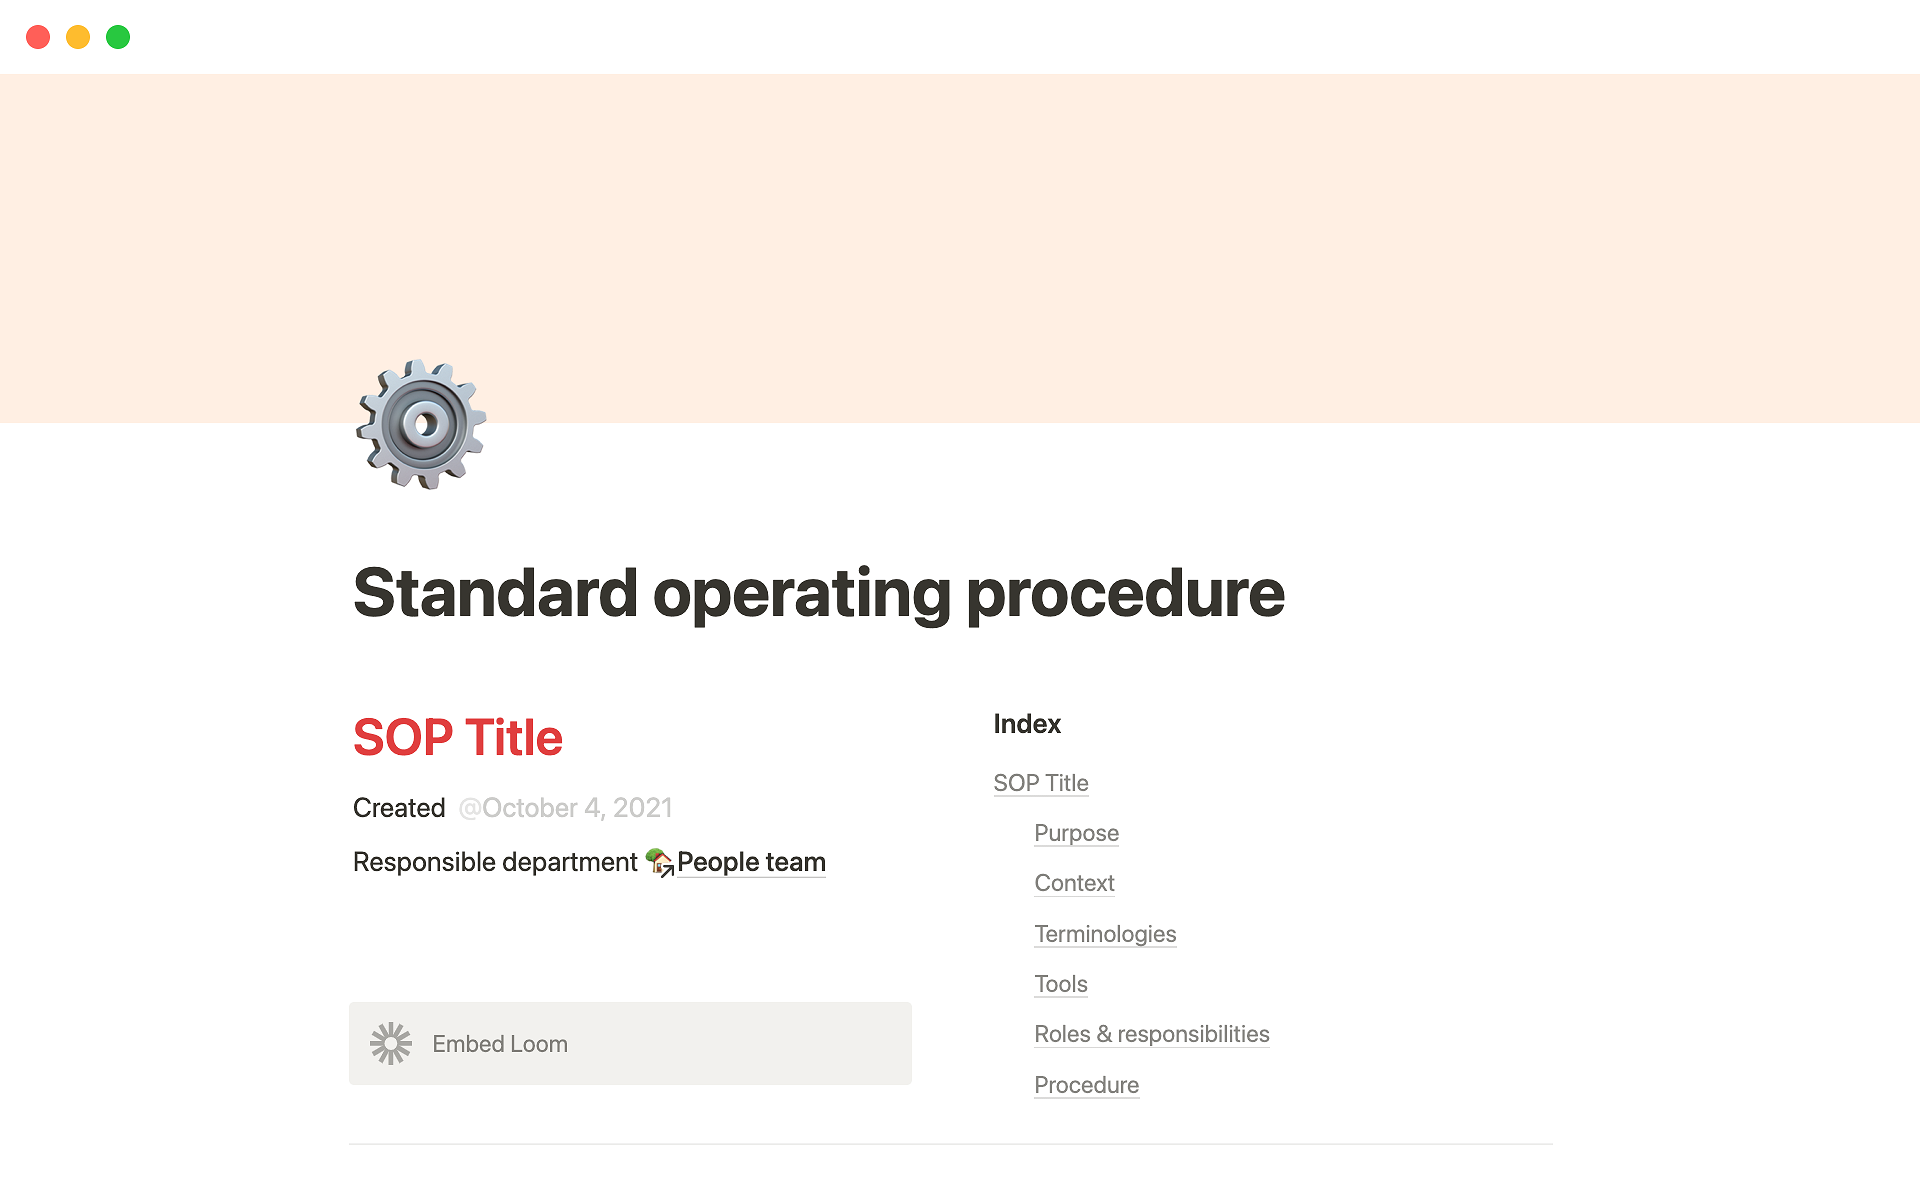 The desktop image for the Standard operating procedure template